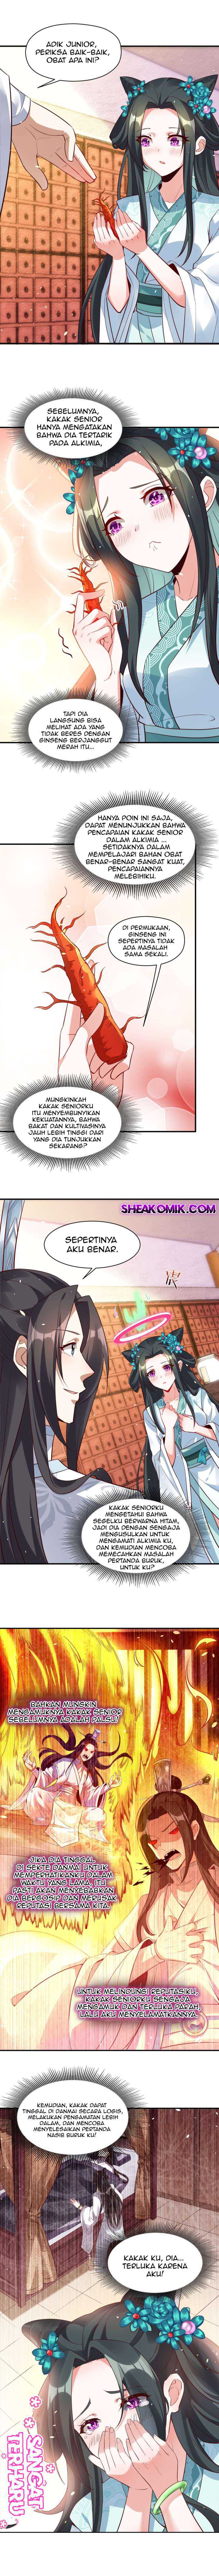 Fairy, You have a Bad Omen! Chapter 01